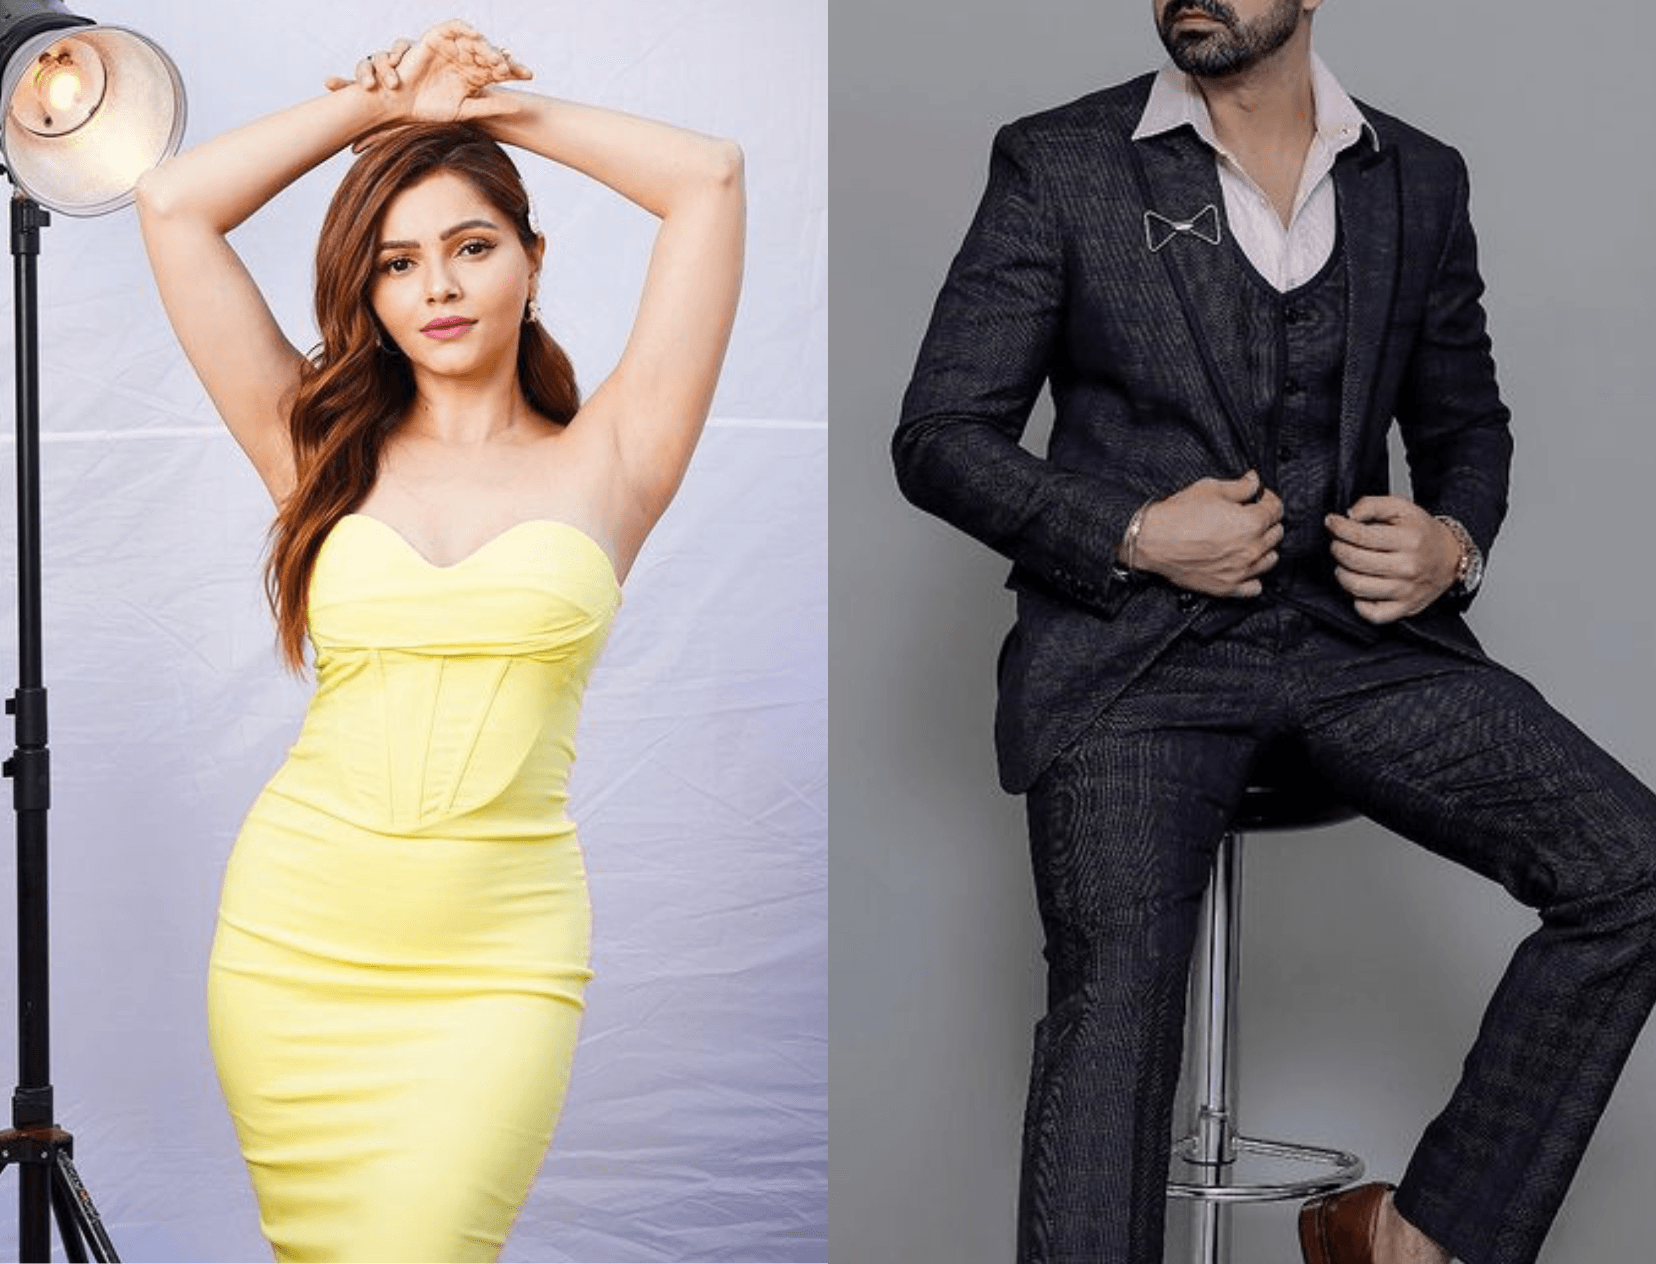 Did You Know Rubina Dilaik Dated This Bigg Boss OTT 2 Contestant?